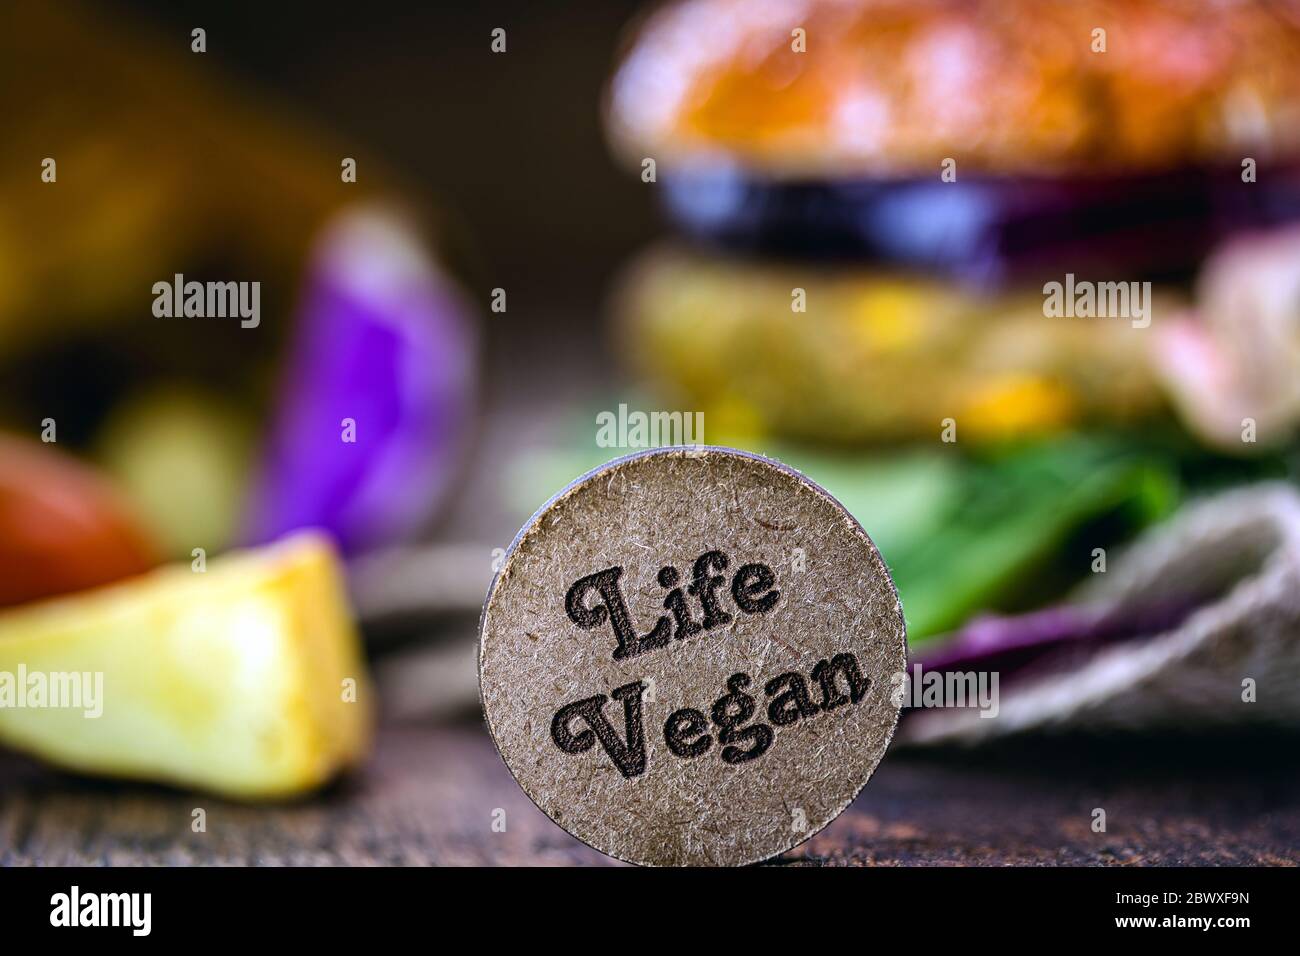 small wooden sign with the English phrase: Vegan life. Concept of vegan food, vegetarian lifestyle or change in eating habits. Stock Photo